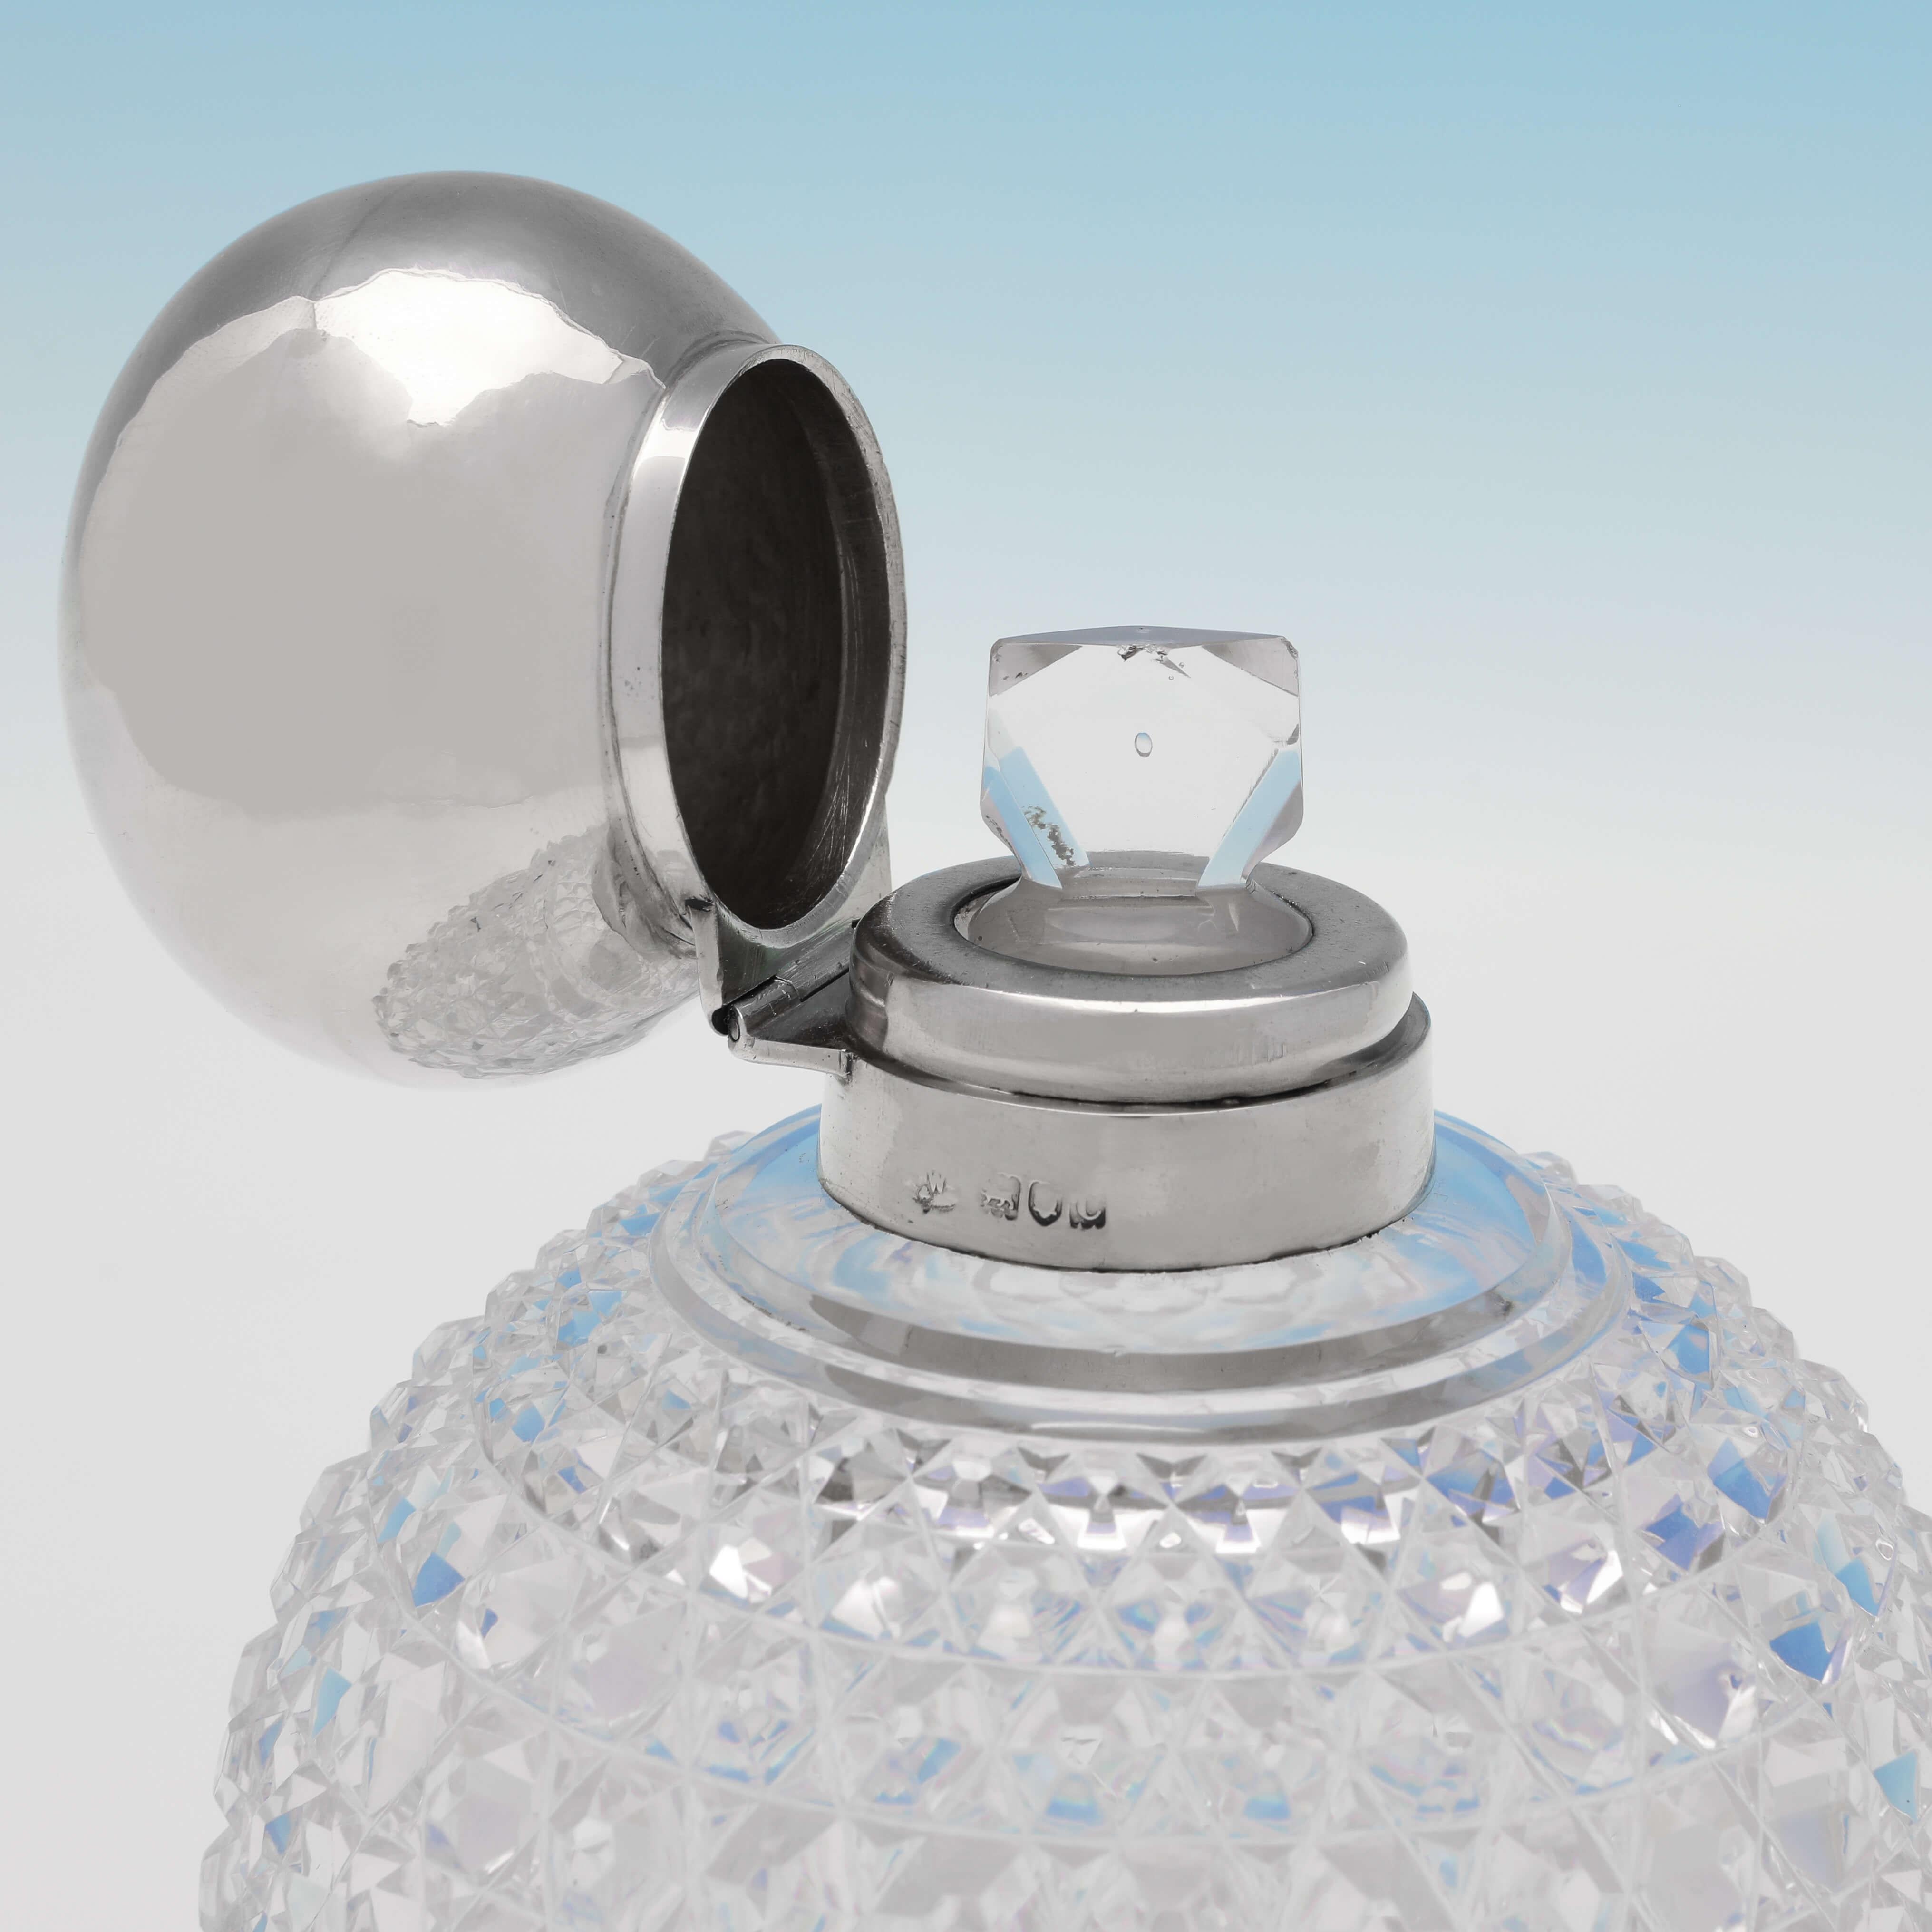 Hallmarked in London in 1898 by Mappin & Webb, this handsome, Victorian, antique sterling silver scent bottle, features a cut glass body, and a plain silver mount and lid. The scent bottle measures 6.25